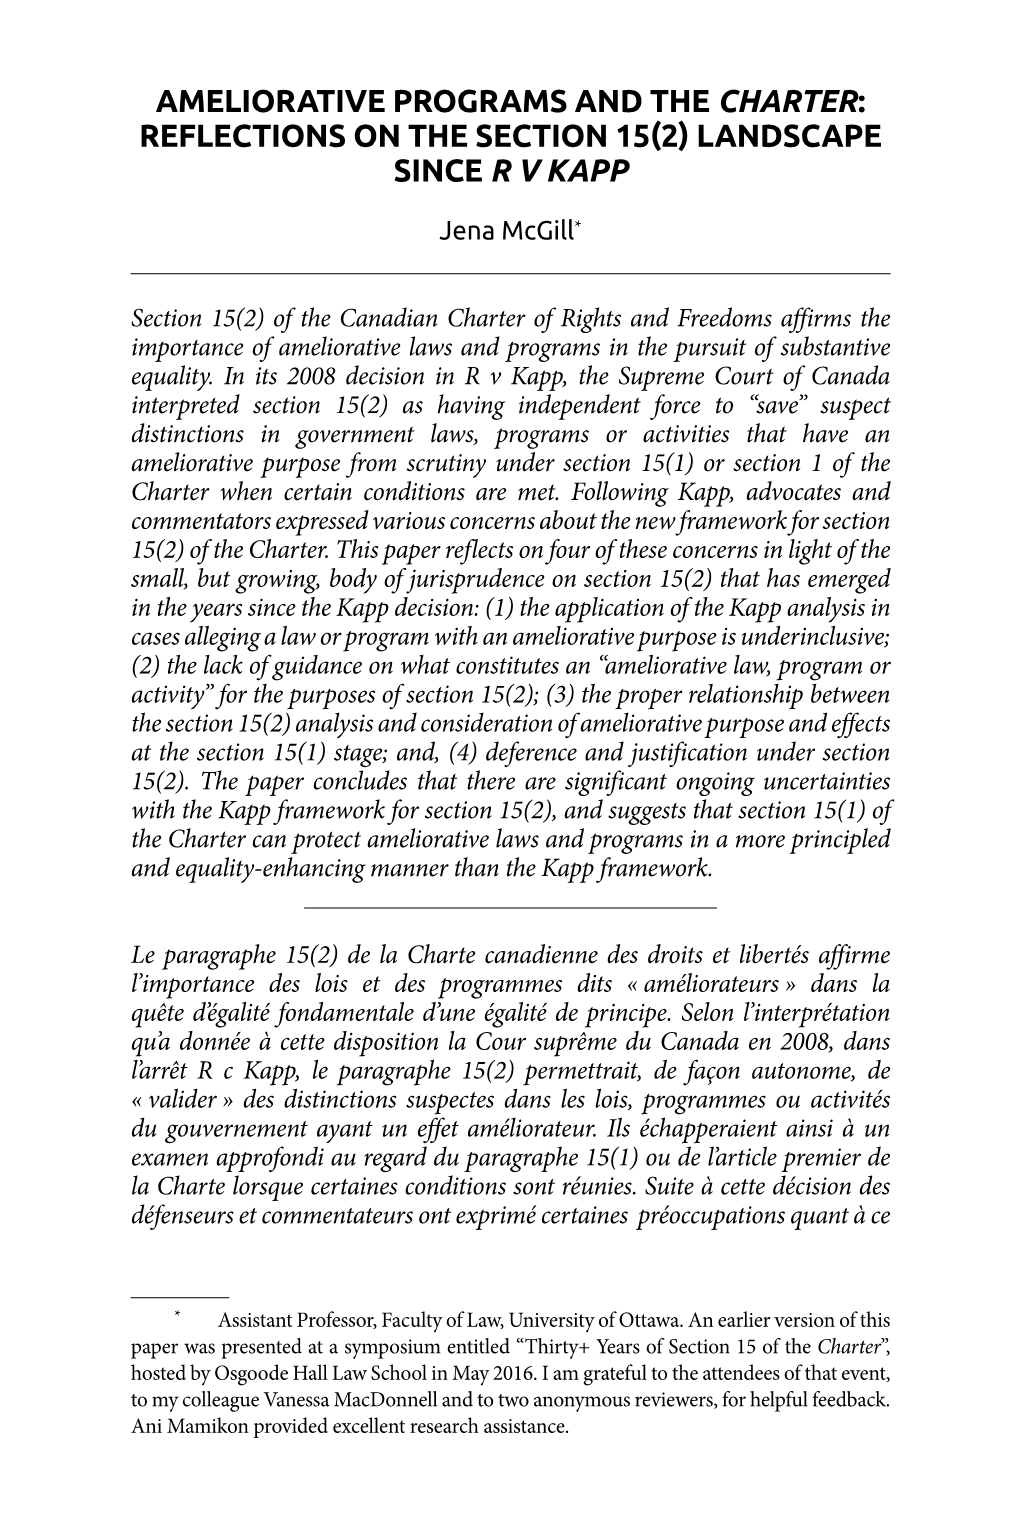 Ameliorative Programs and the Charter: Reflections on the Section 15(2) Landscape Since R V Kapp